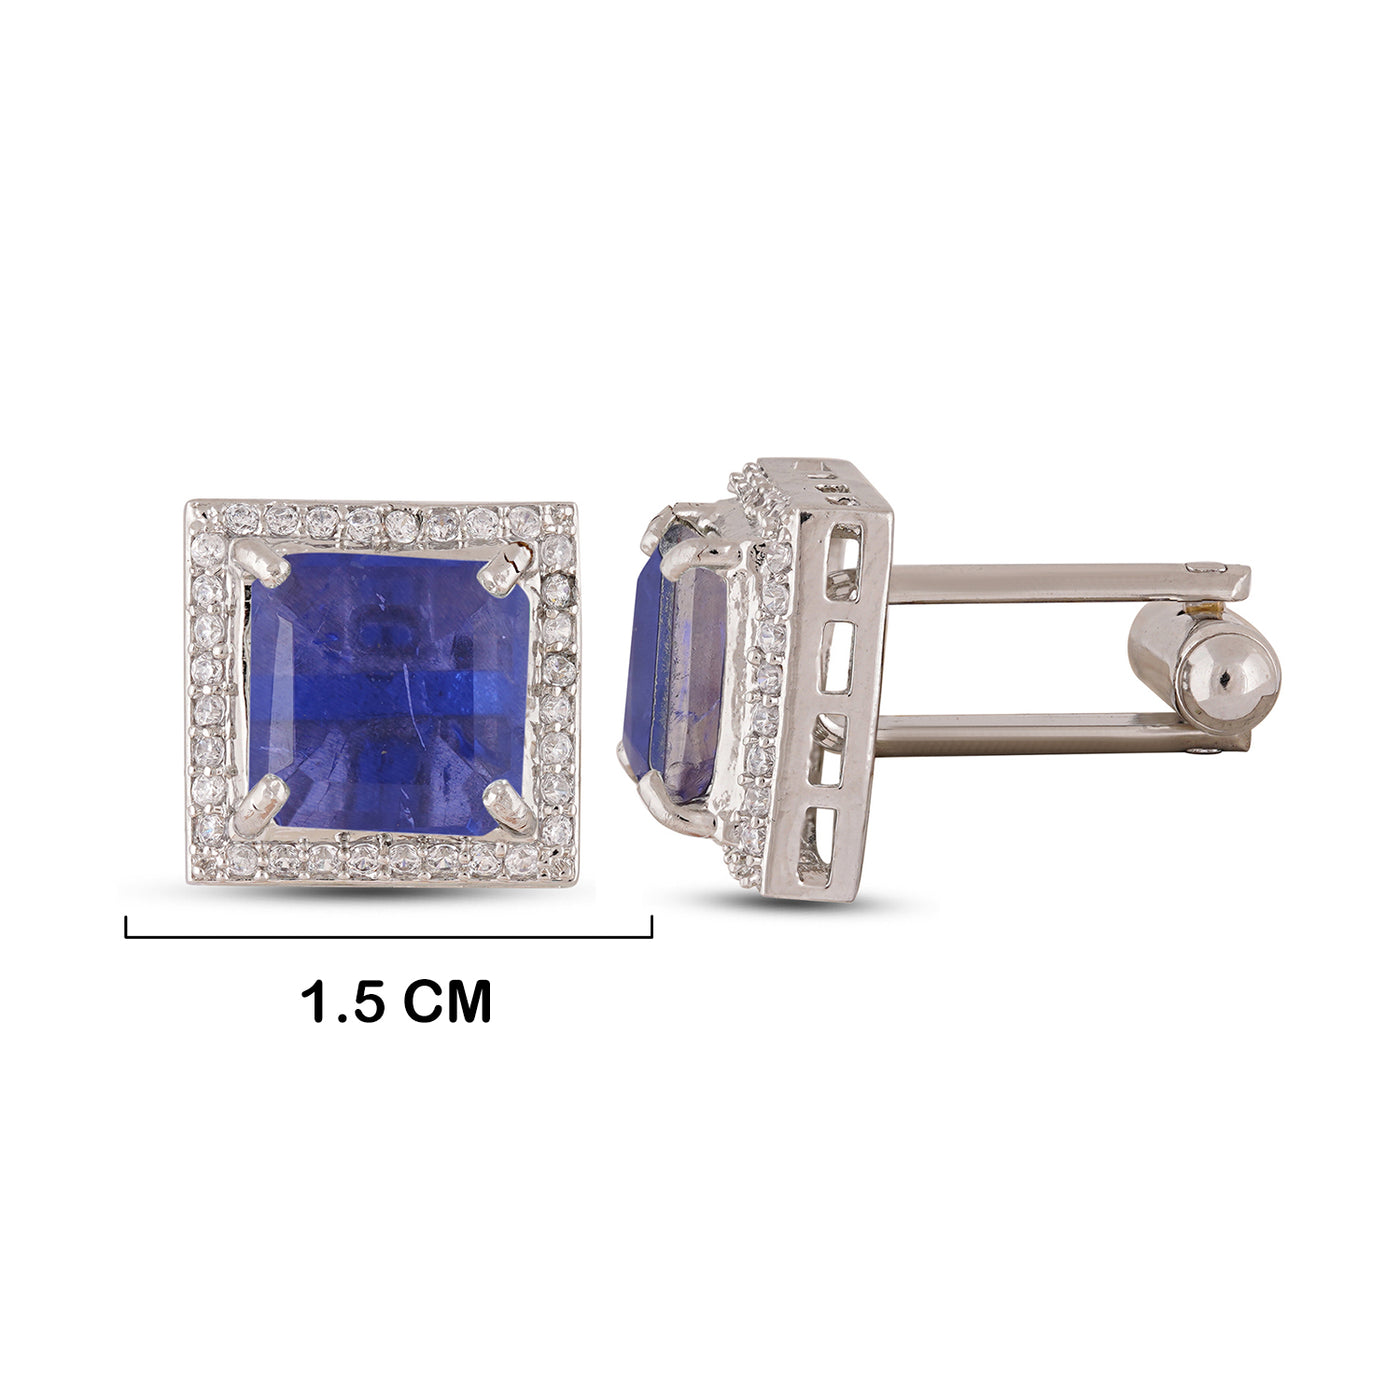 Blue Stoned CZ Cufflinks with measurements in cm. 1.5cm.